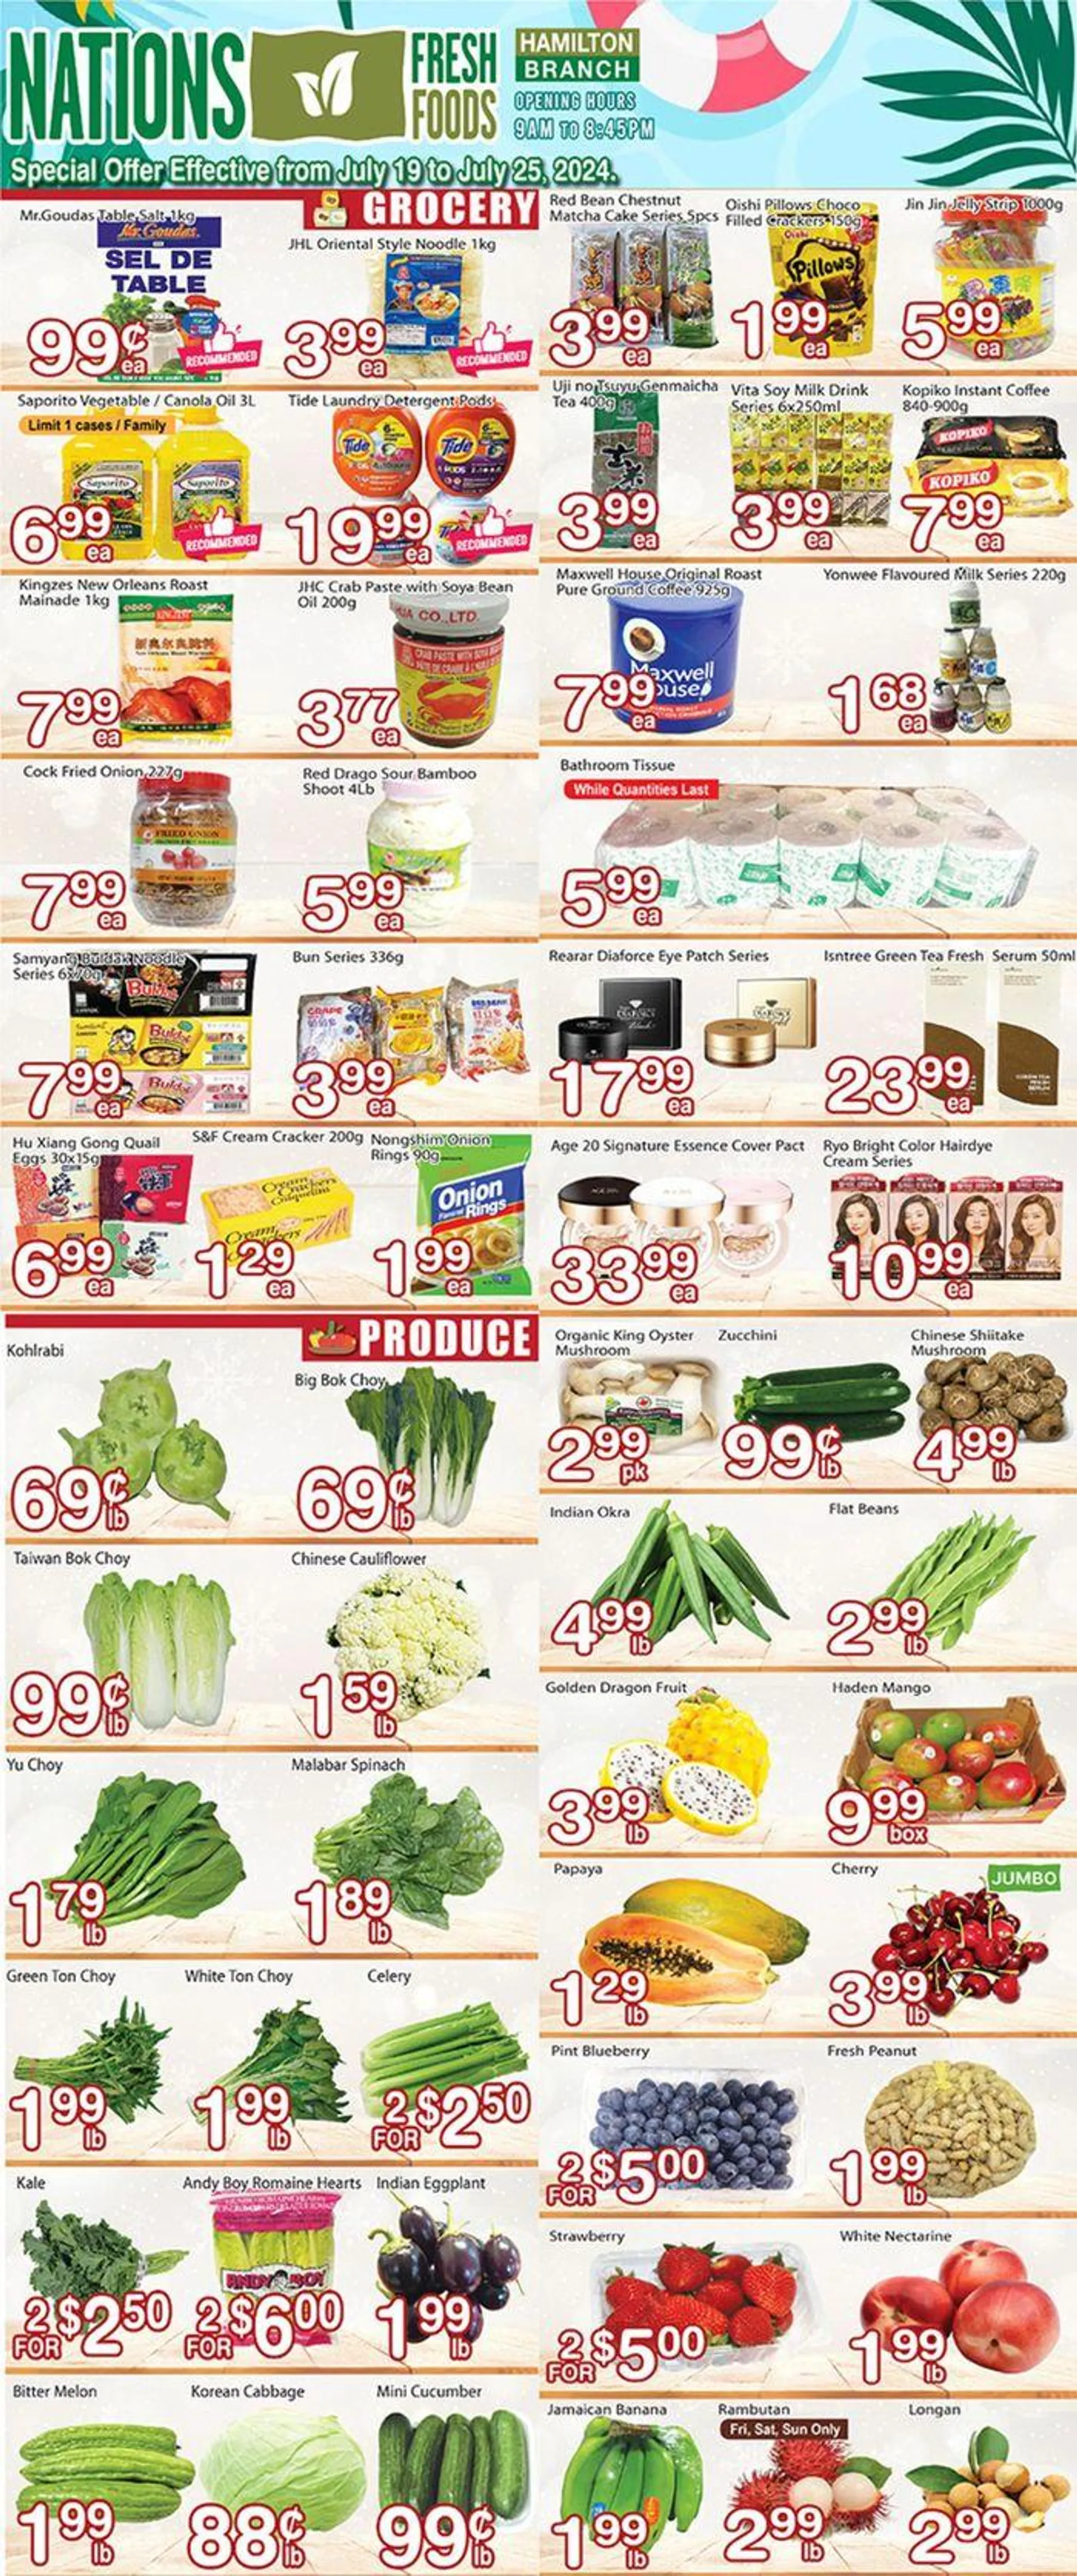 Weekly special Nations Fresh Foods - 1